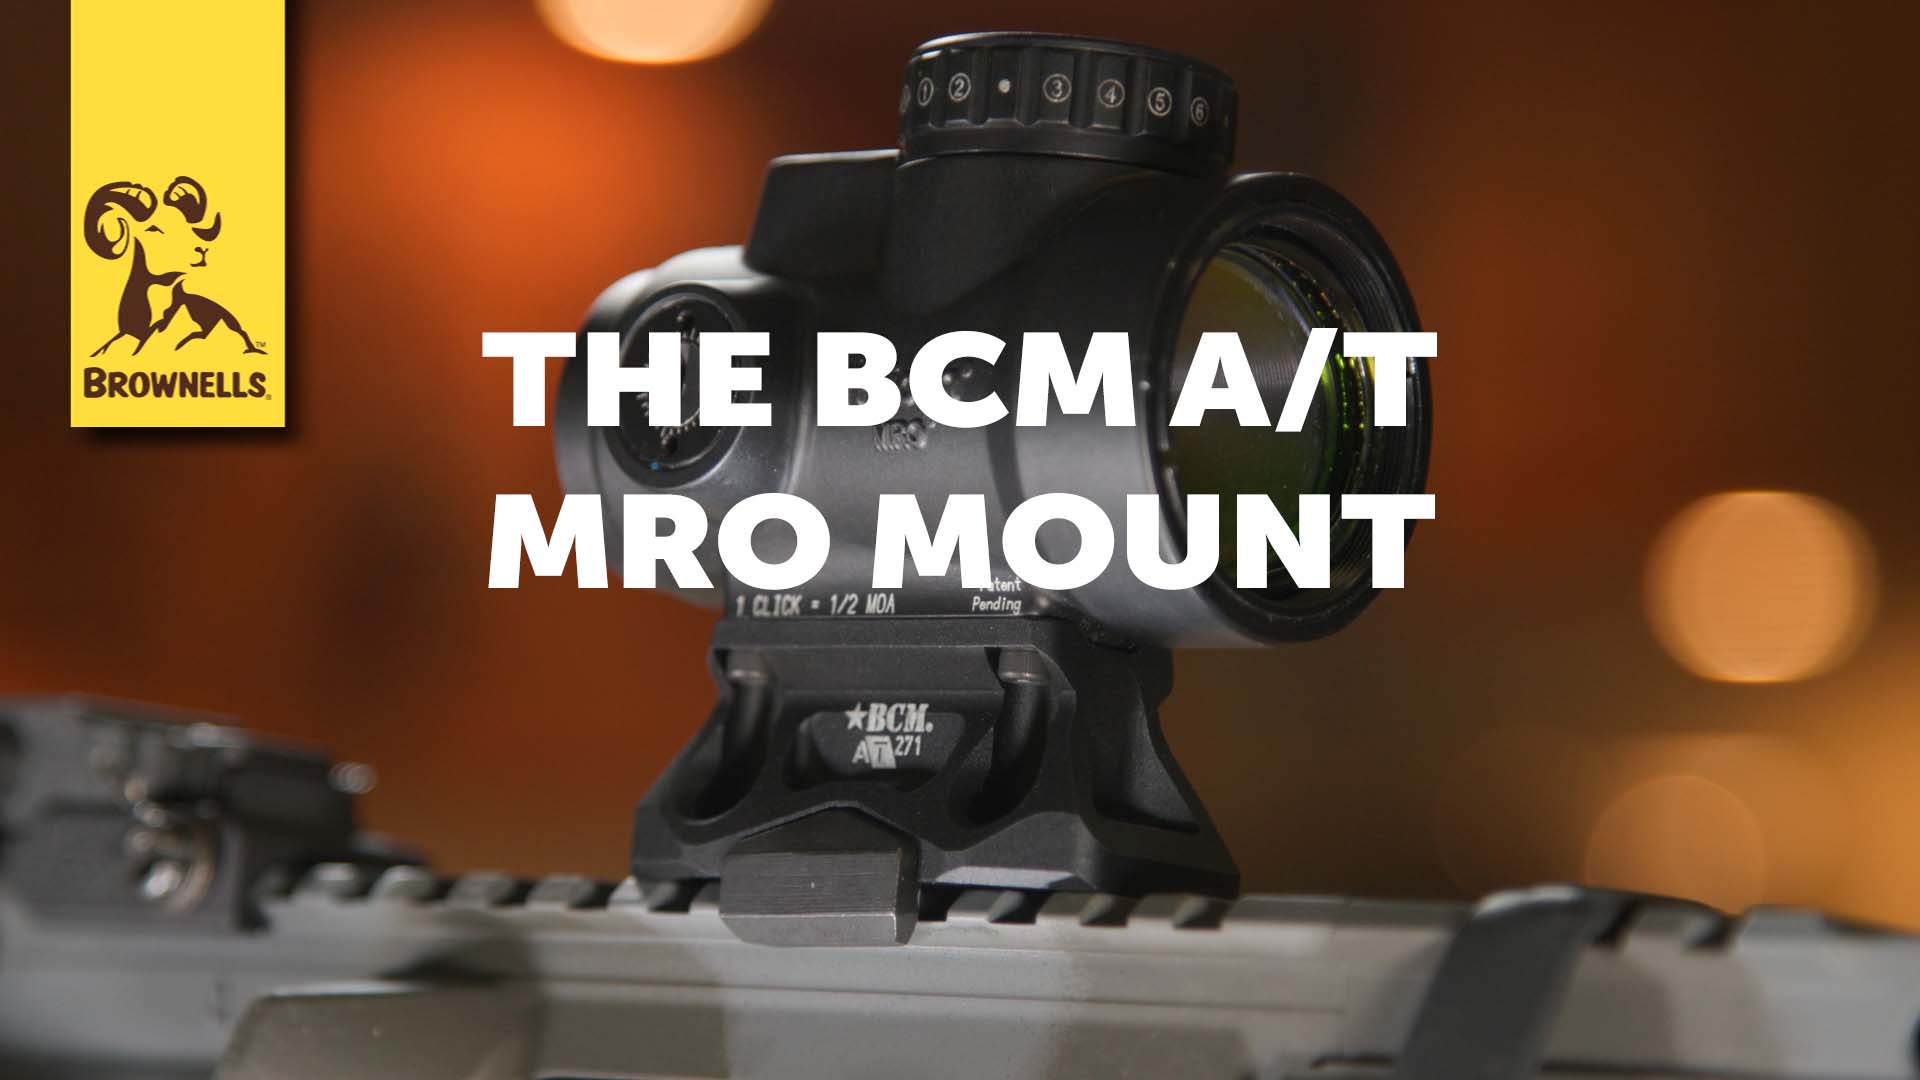 Product Spotlight: The BCM A/T MRO Mount